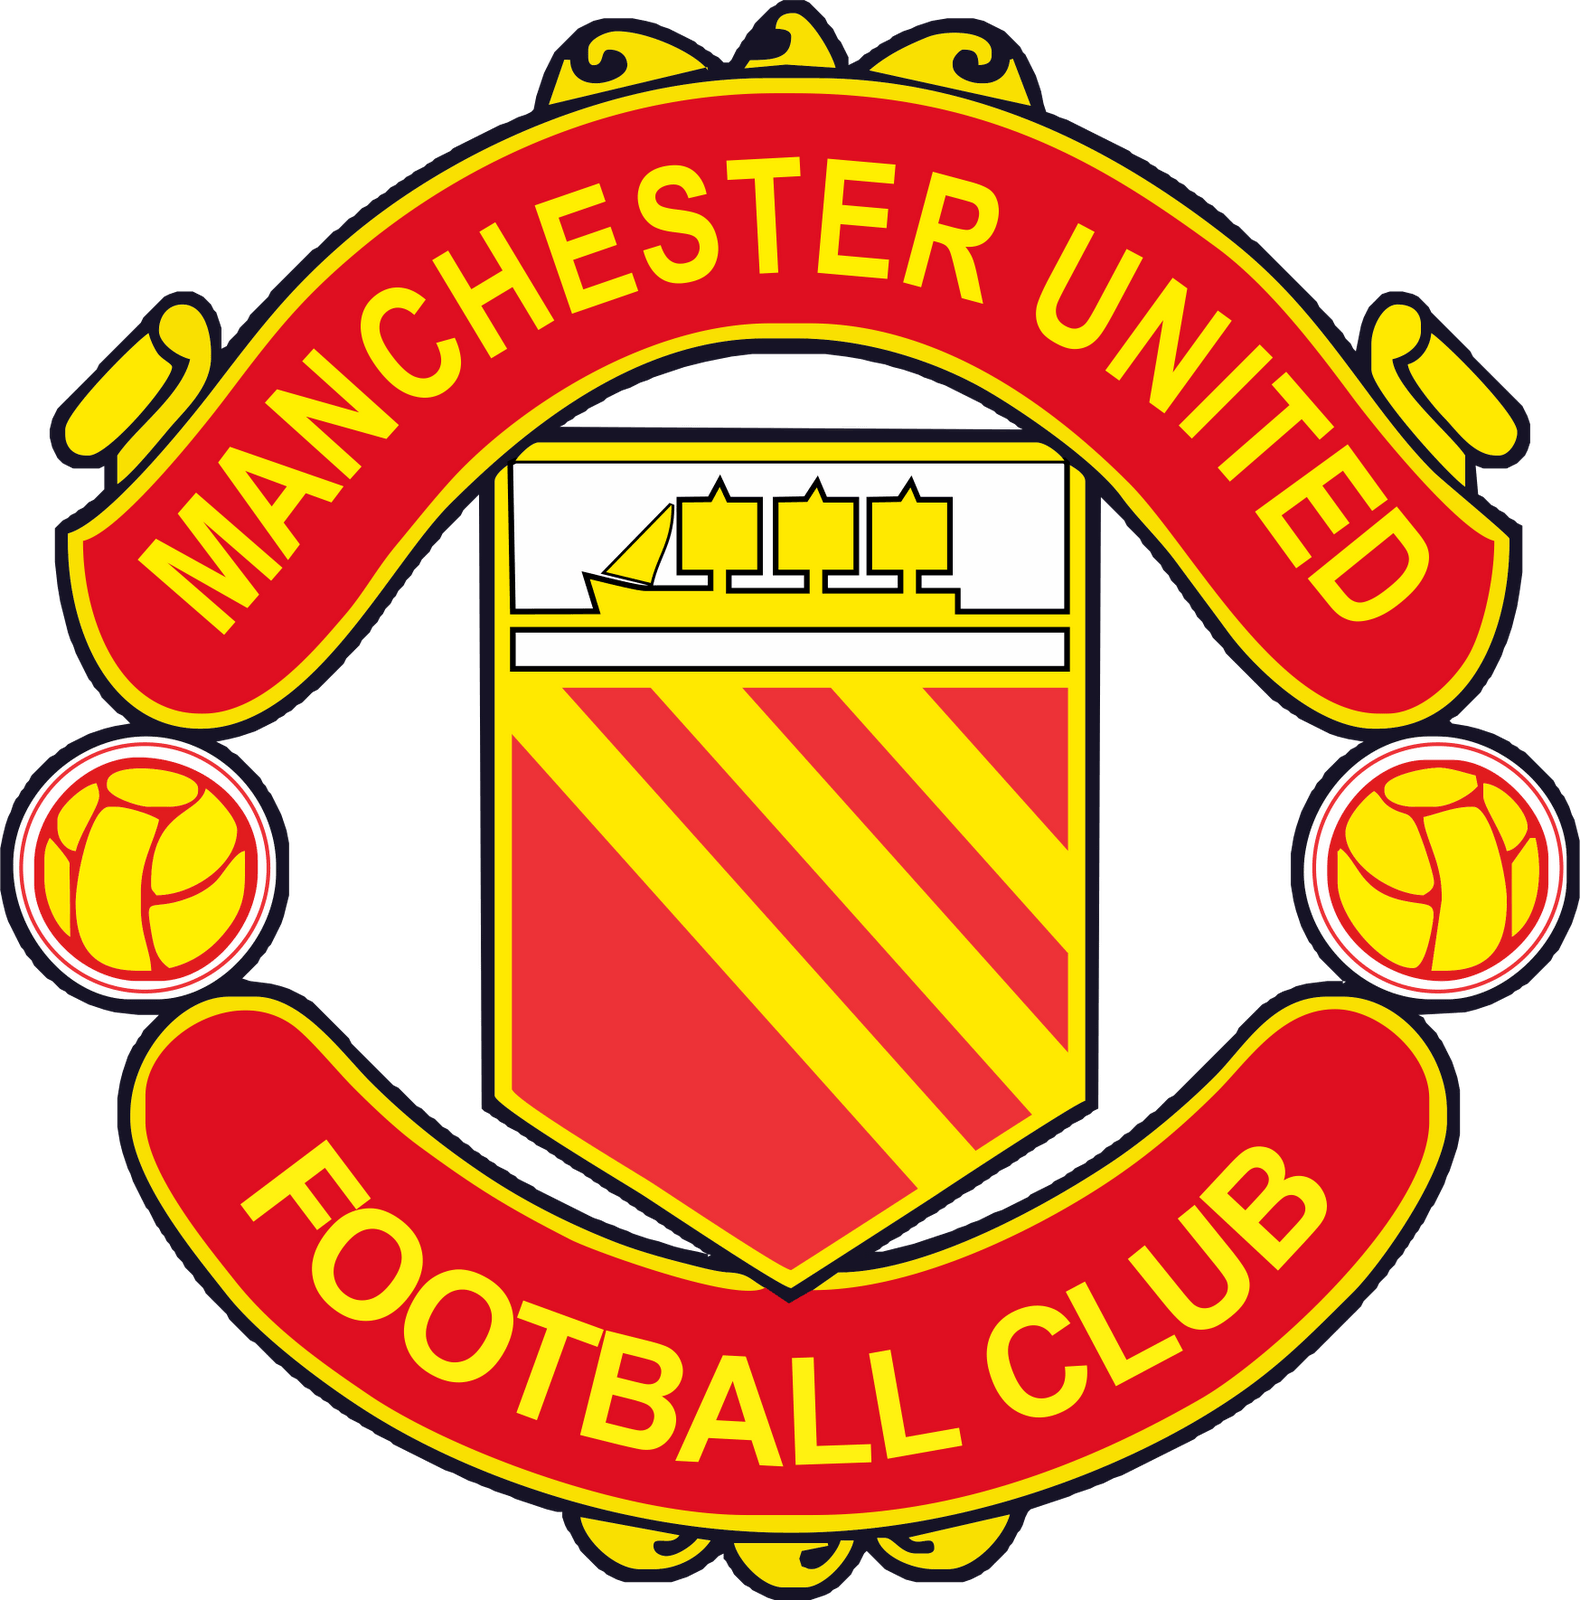 Manchester United Logo - Manchester United logo PNG images free download